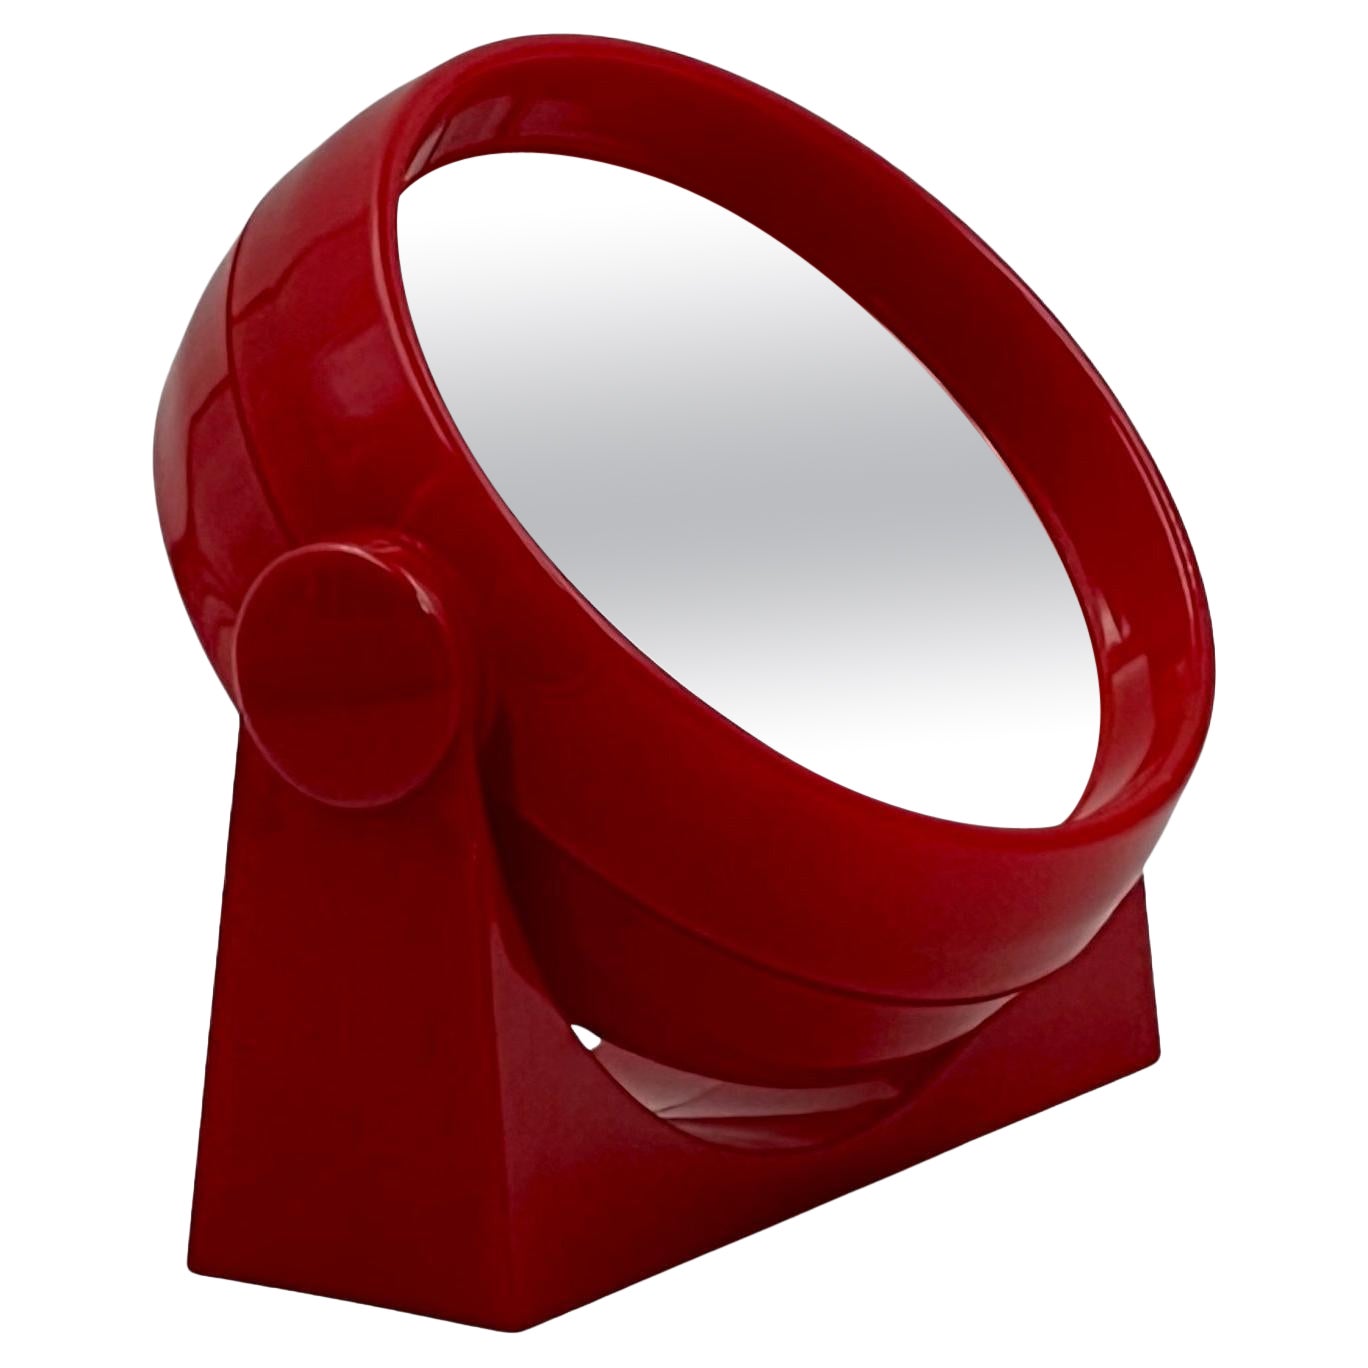 Space Age Red Table Mirror - Retro-Futuristic 1970s Design Made in Germany For Sale